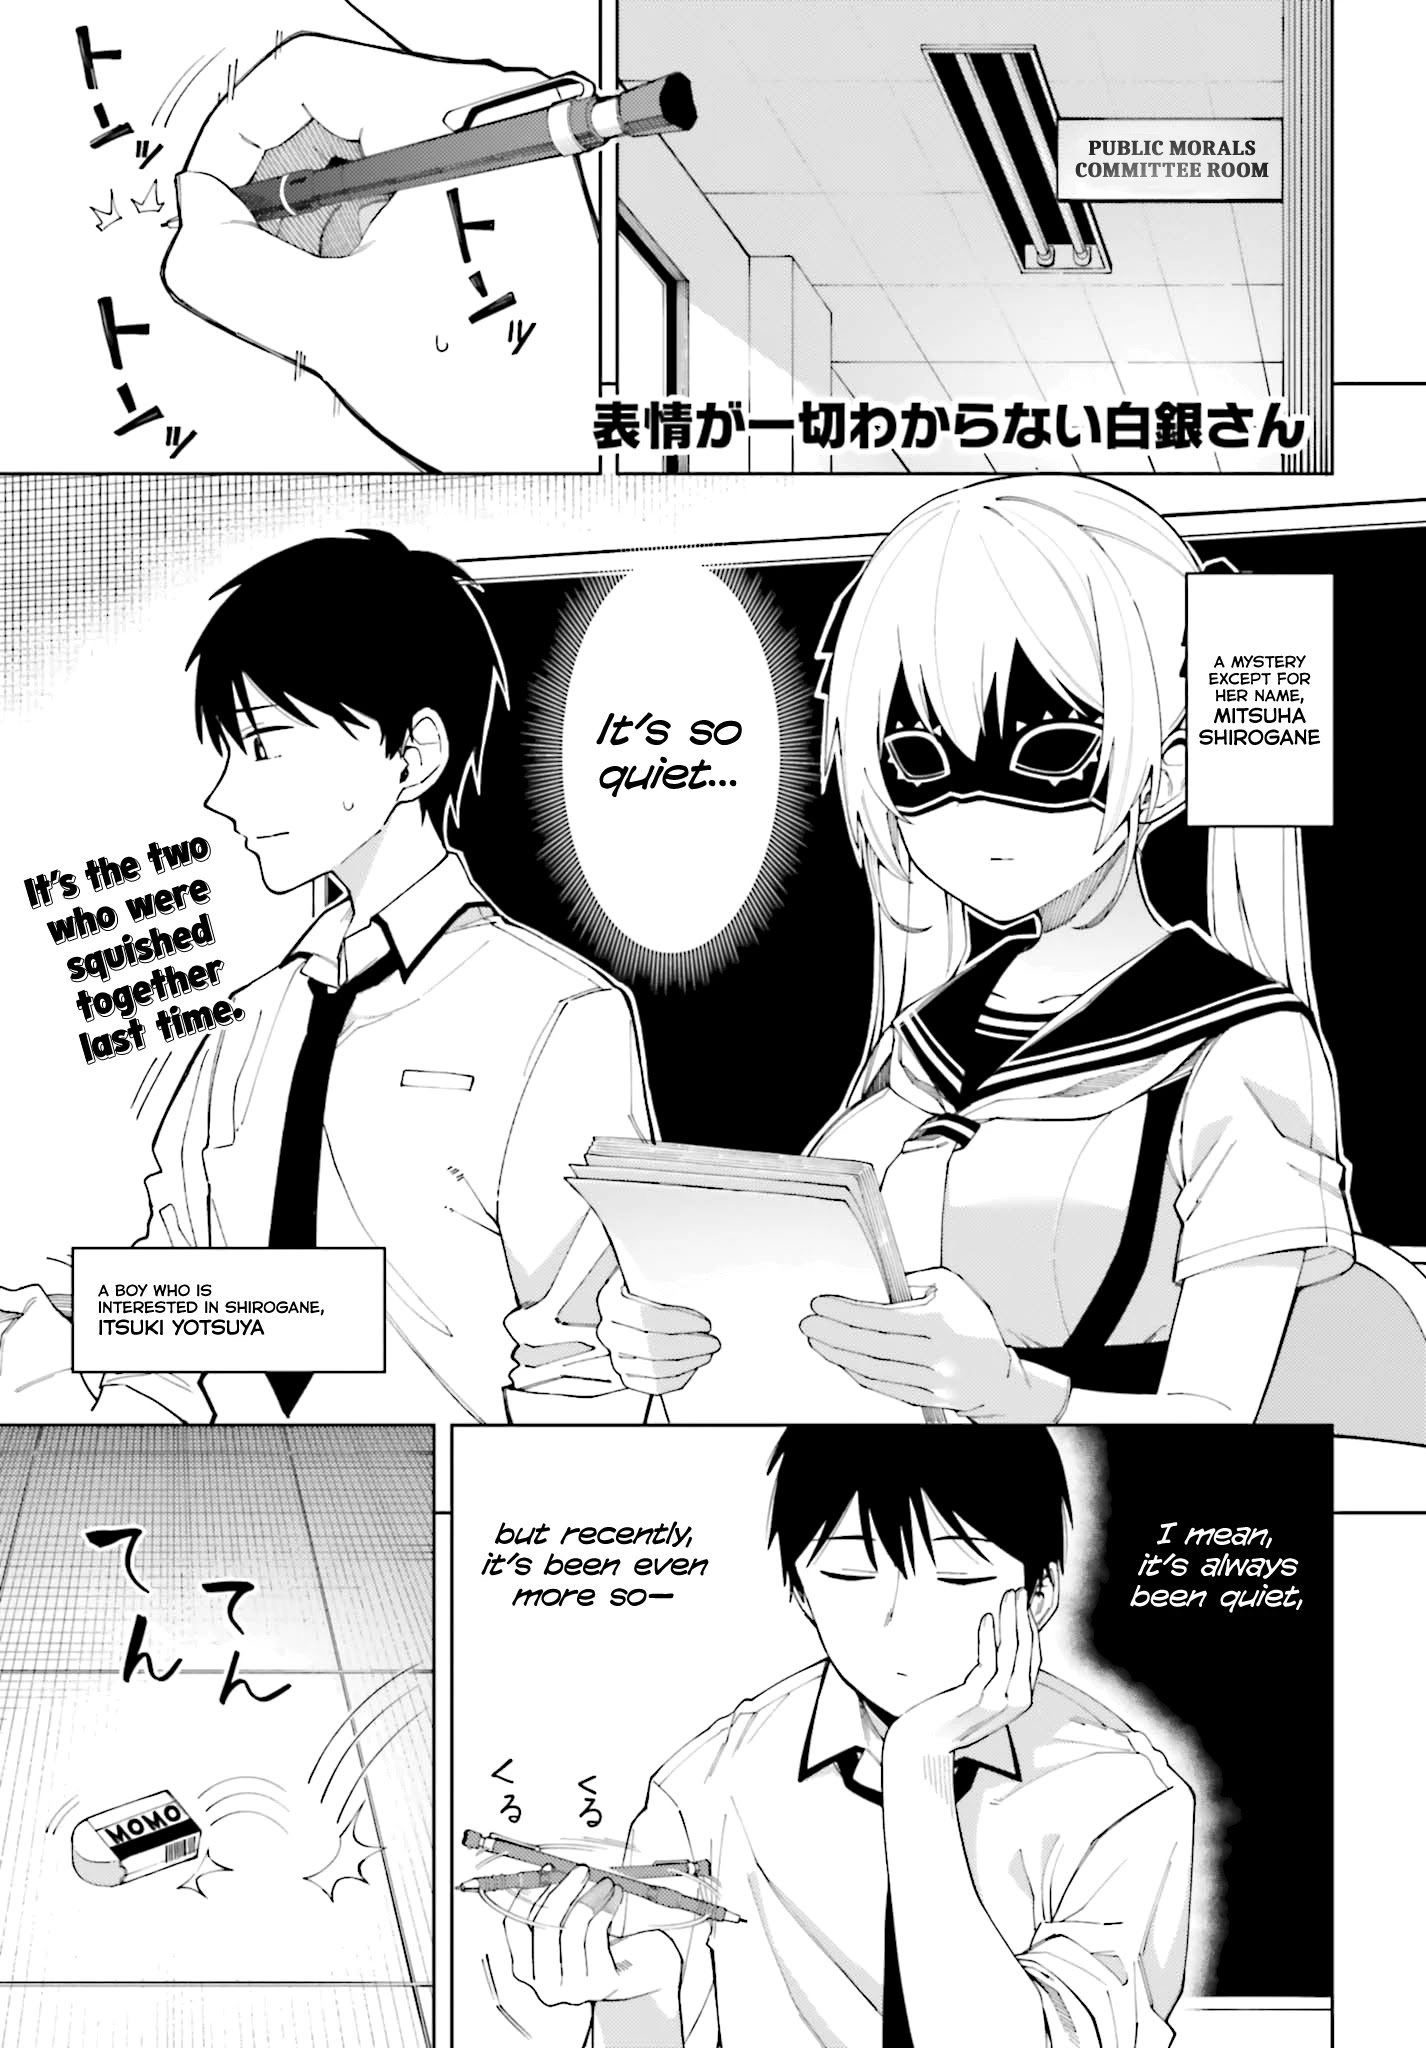 I Don't Understand Shirogane-San's Facial Expression At All - Page 1